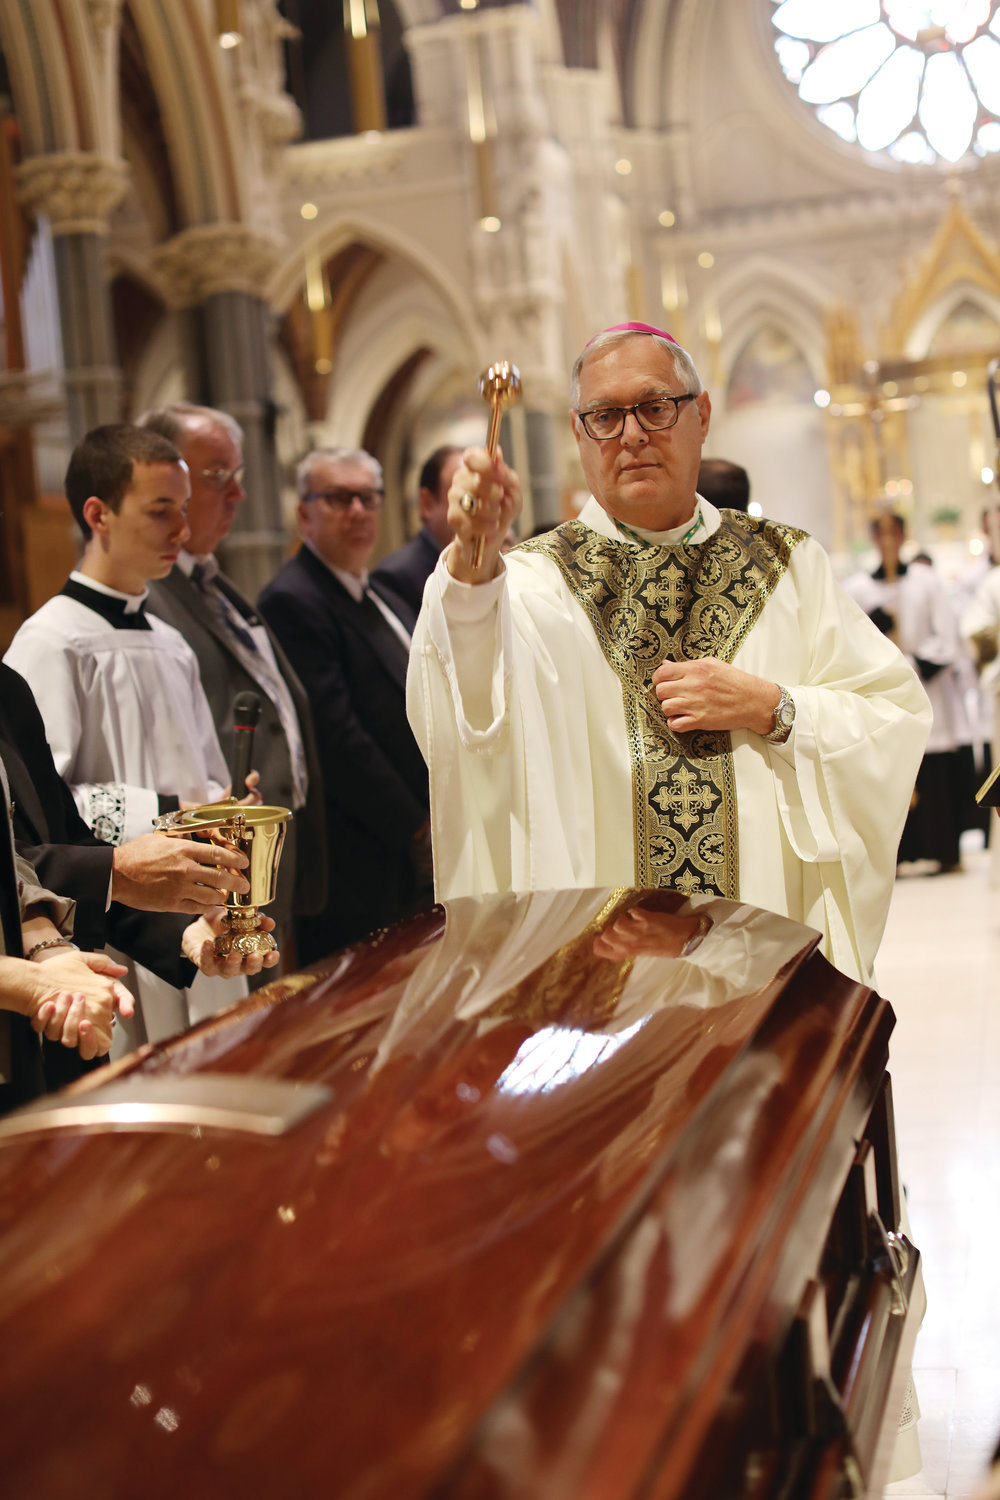 Bishop Thomas J. Tobin blesses the casket of Bishop Francis X. Roque at the start of the funeral Mass celebrated on Thursday, Sept. 19 in the Cathedral of SS. Peter and Paul, Providence.